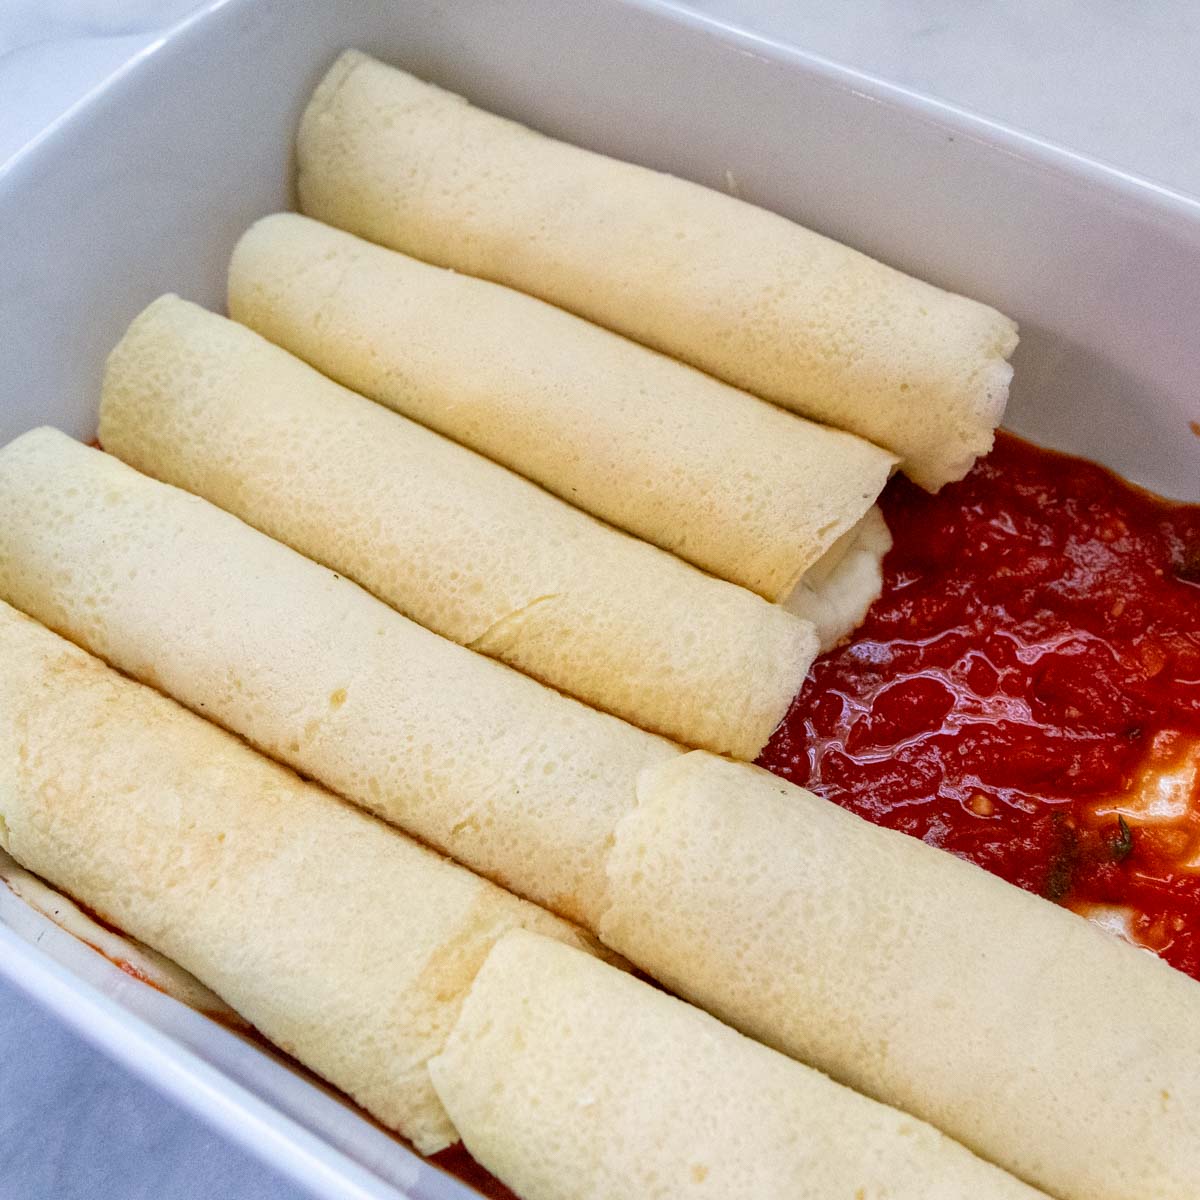 unbaked manicotti lined up in a casserole dish.